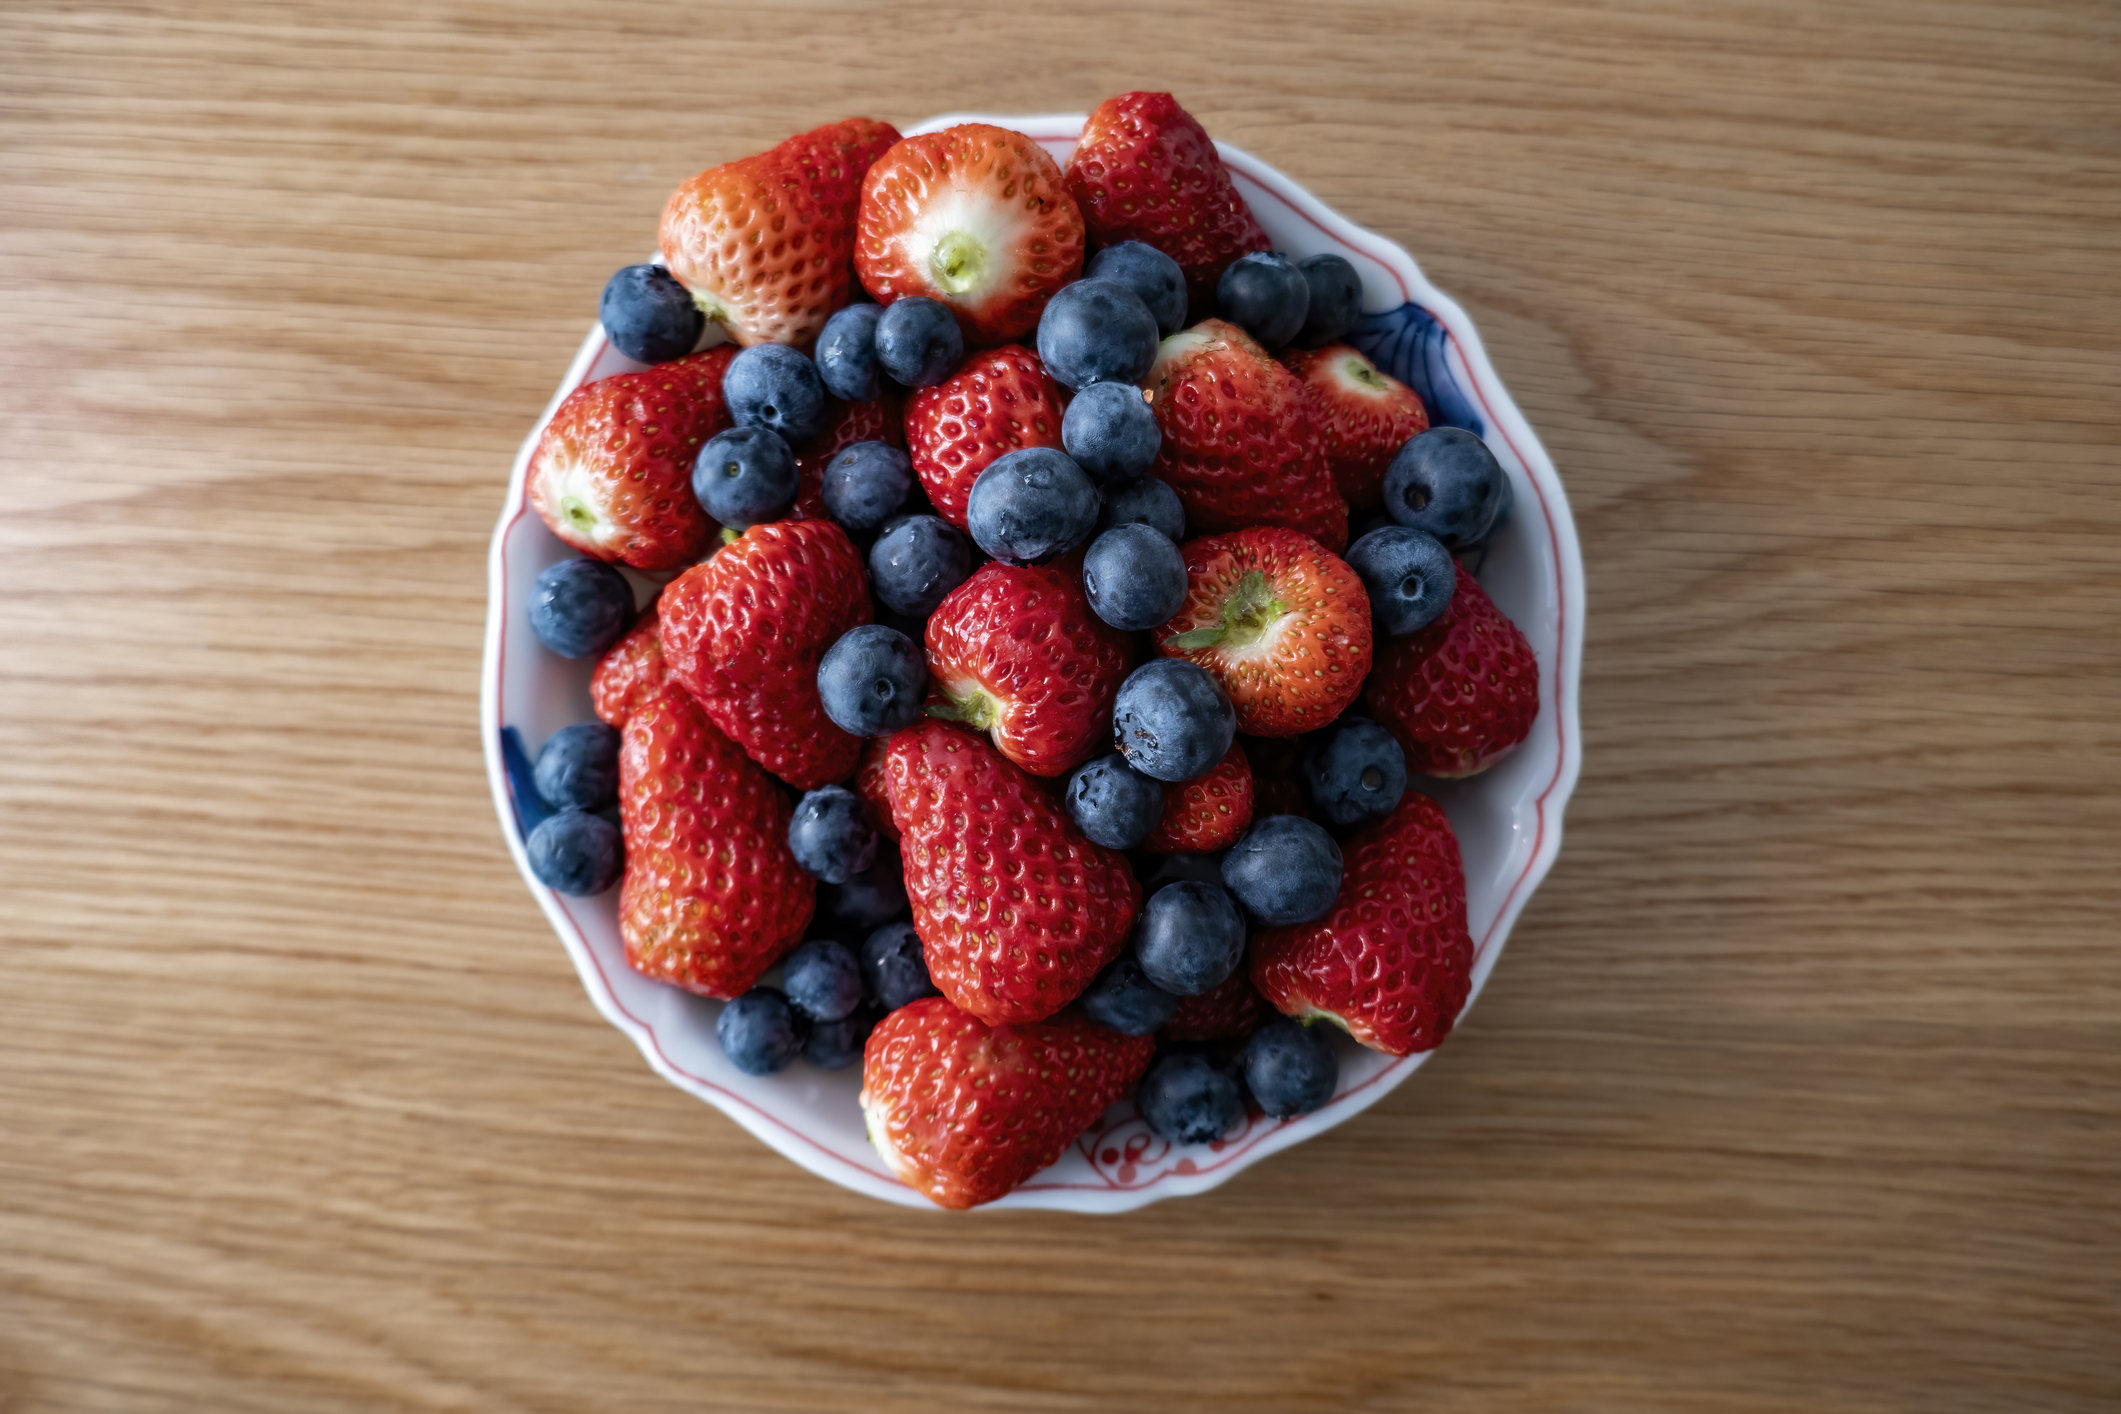 Blueberries and strawberries in a bowl